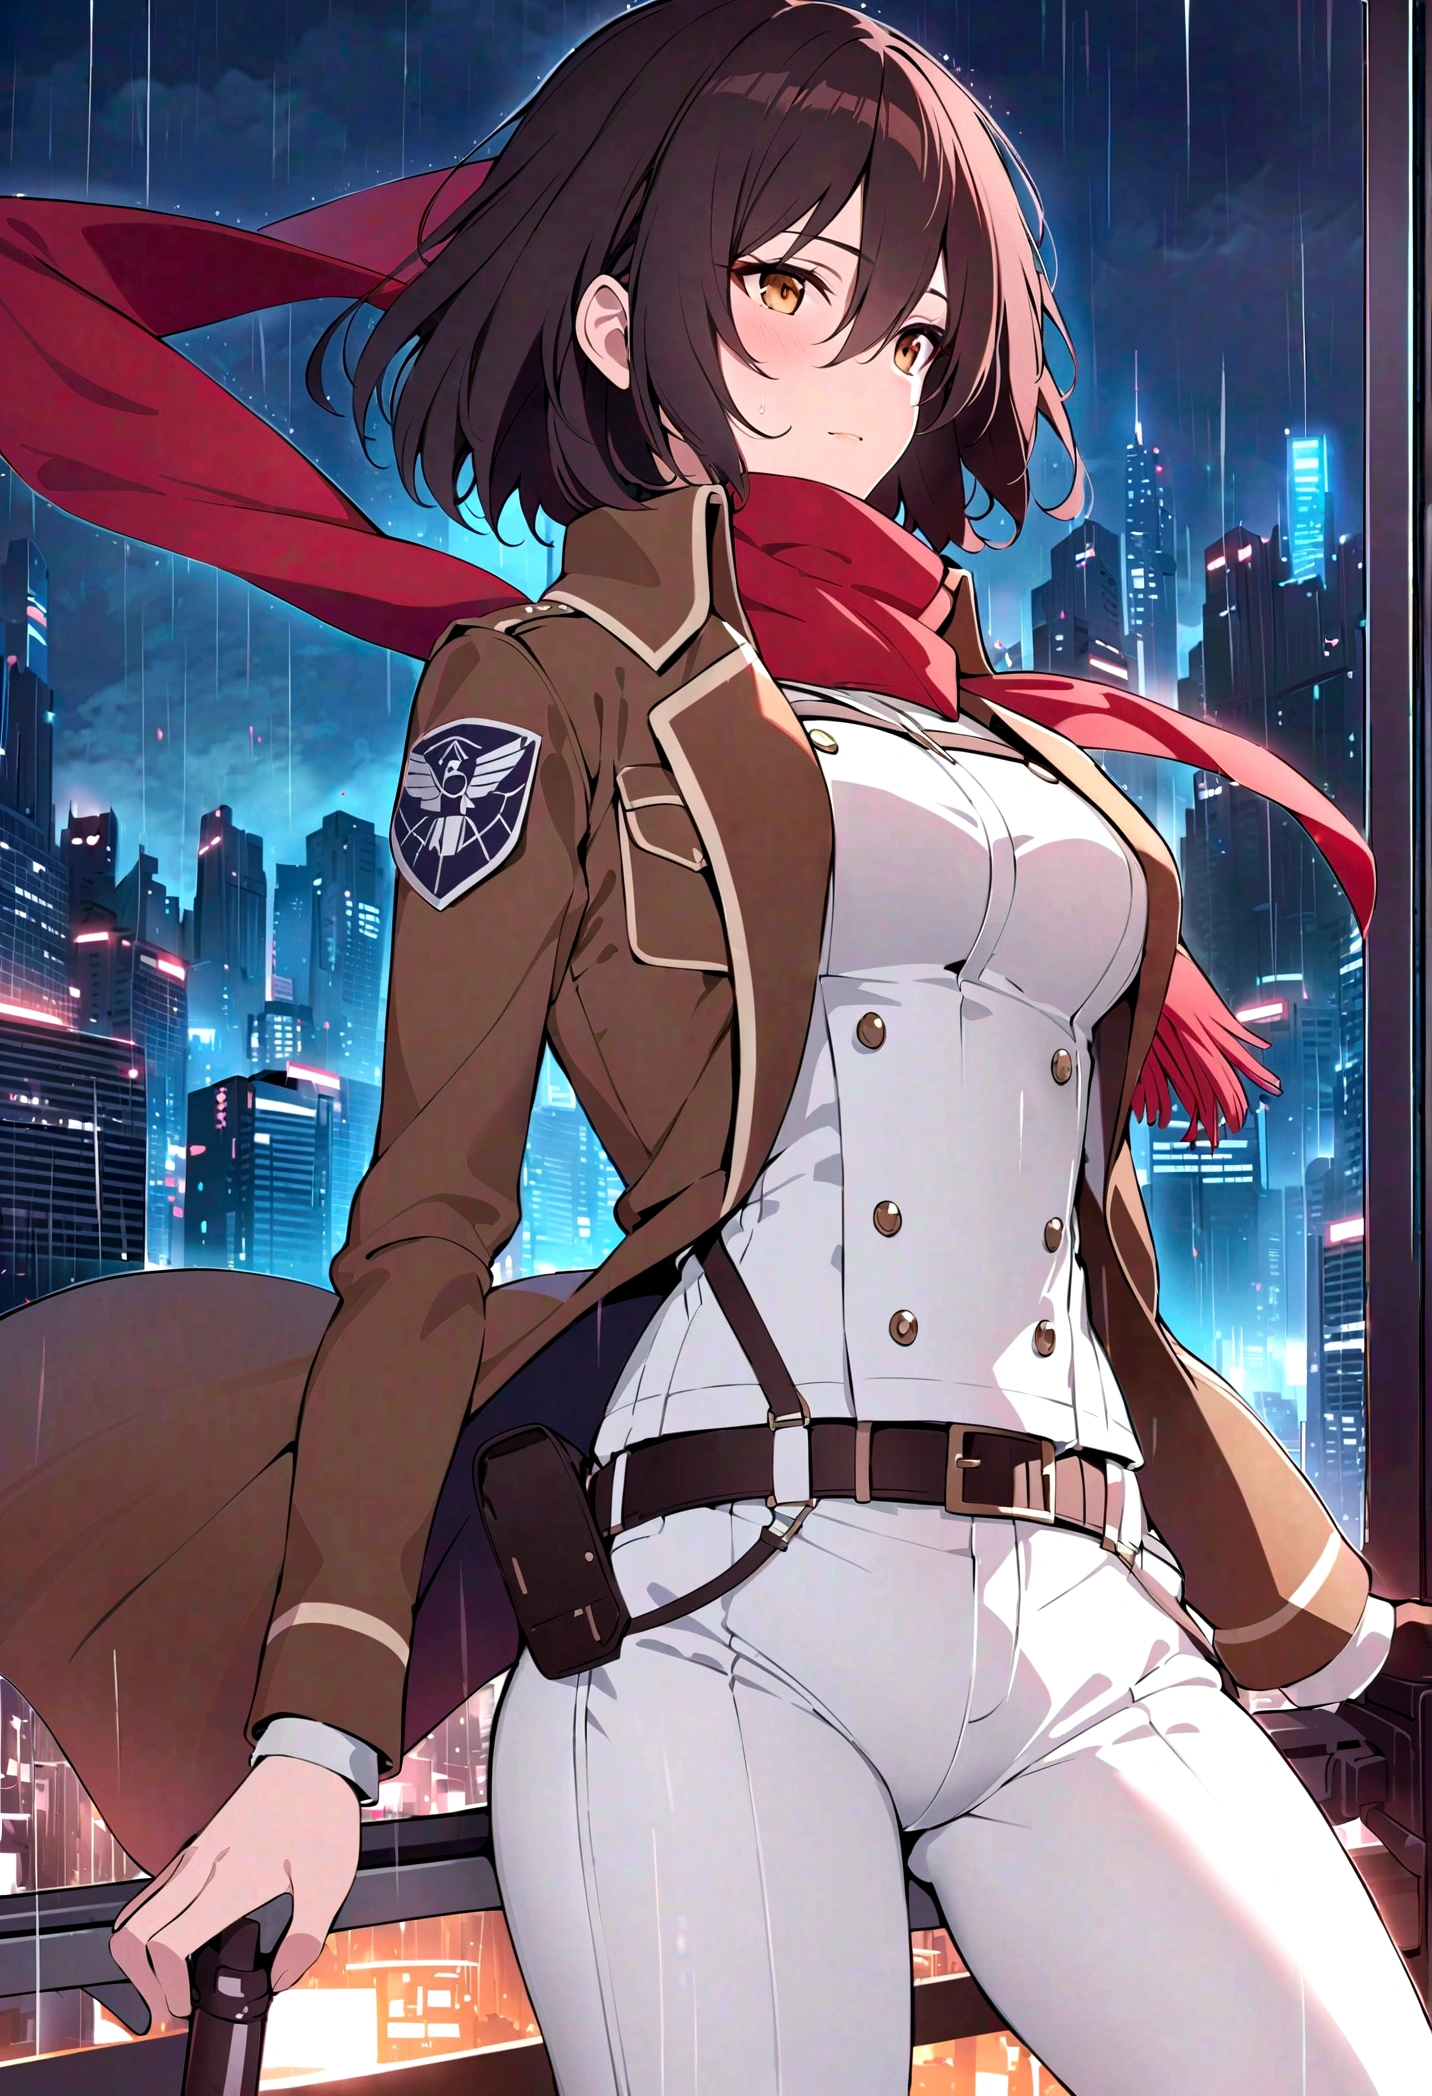 best quality, masterpiece, mikasa ackerman, Red scarf, Brown military uniform, emblem, White pants, futuristic city, night, rain,
very beautiful, Perfect composition, Intricate details, Extremely detailed